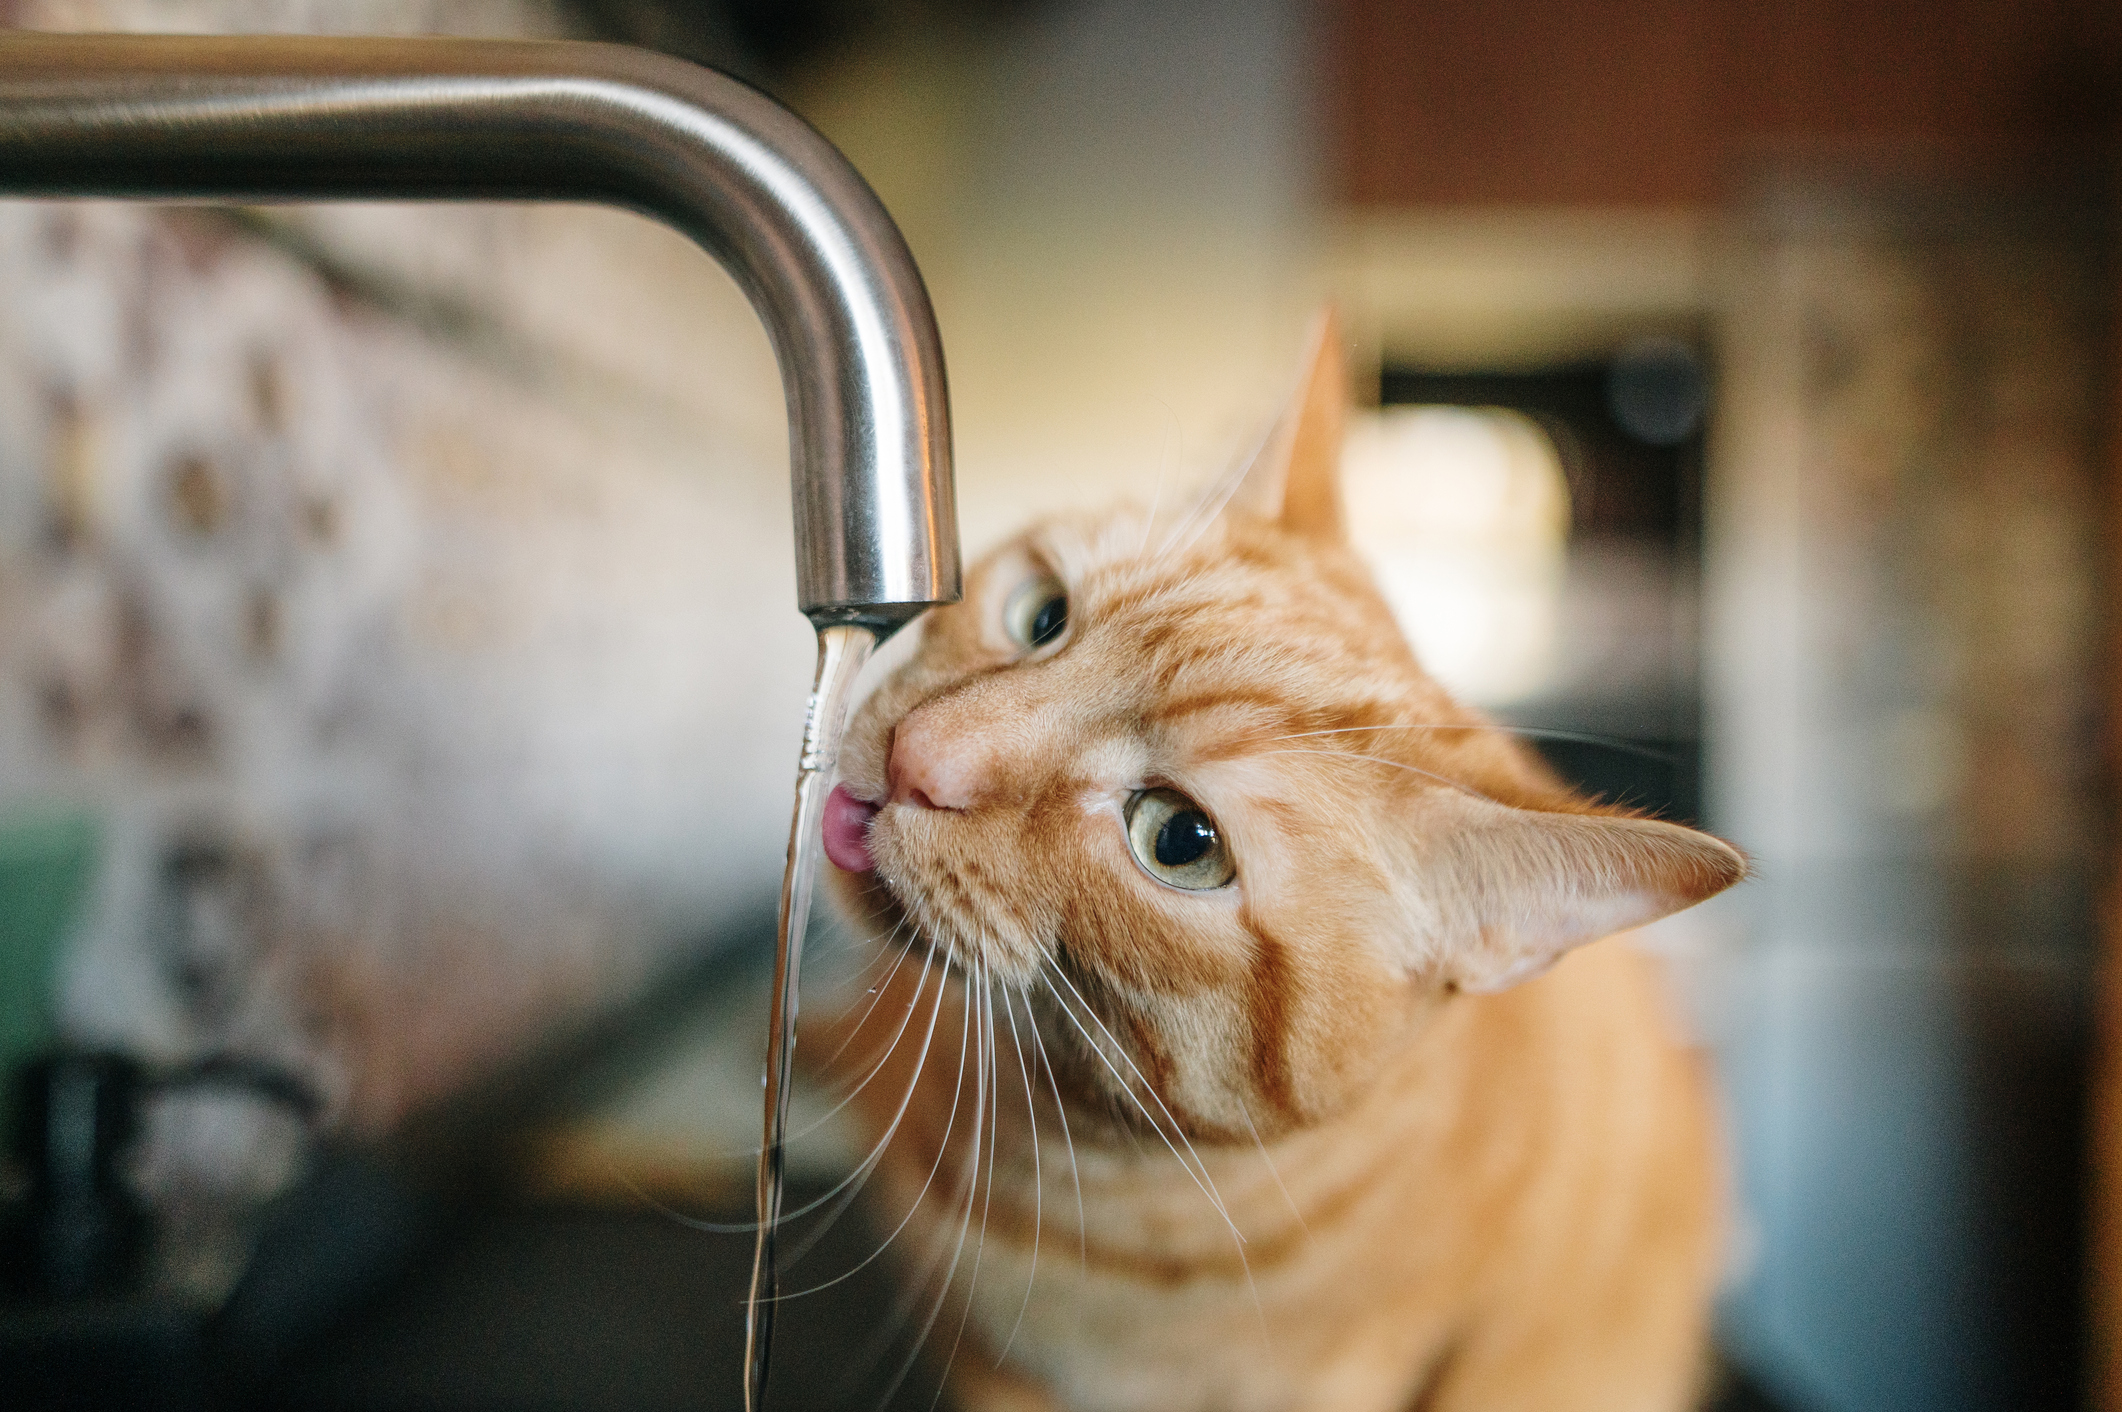 Ginger tabby with green eyes drinks water flowing from a kitchen tap